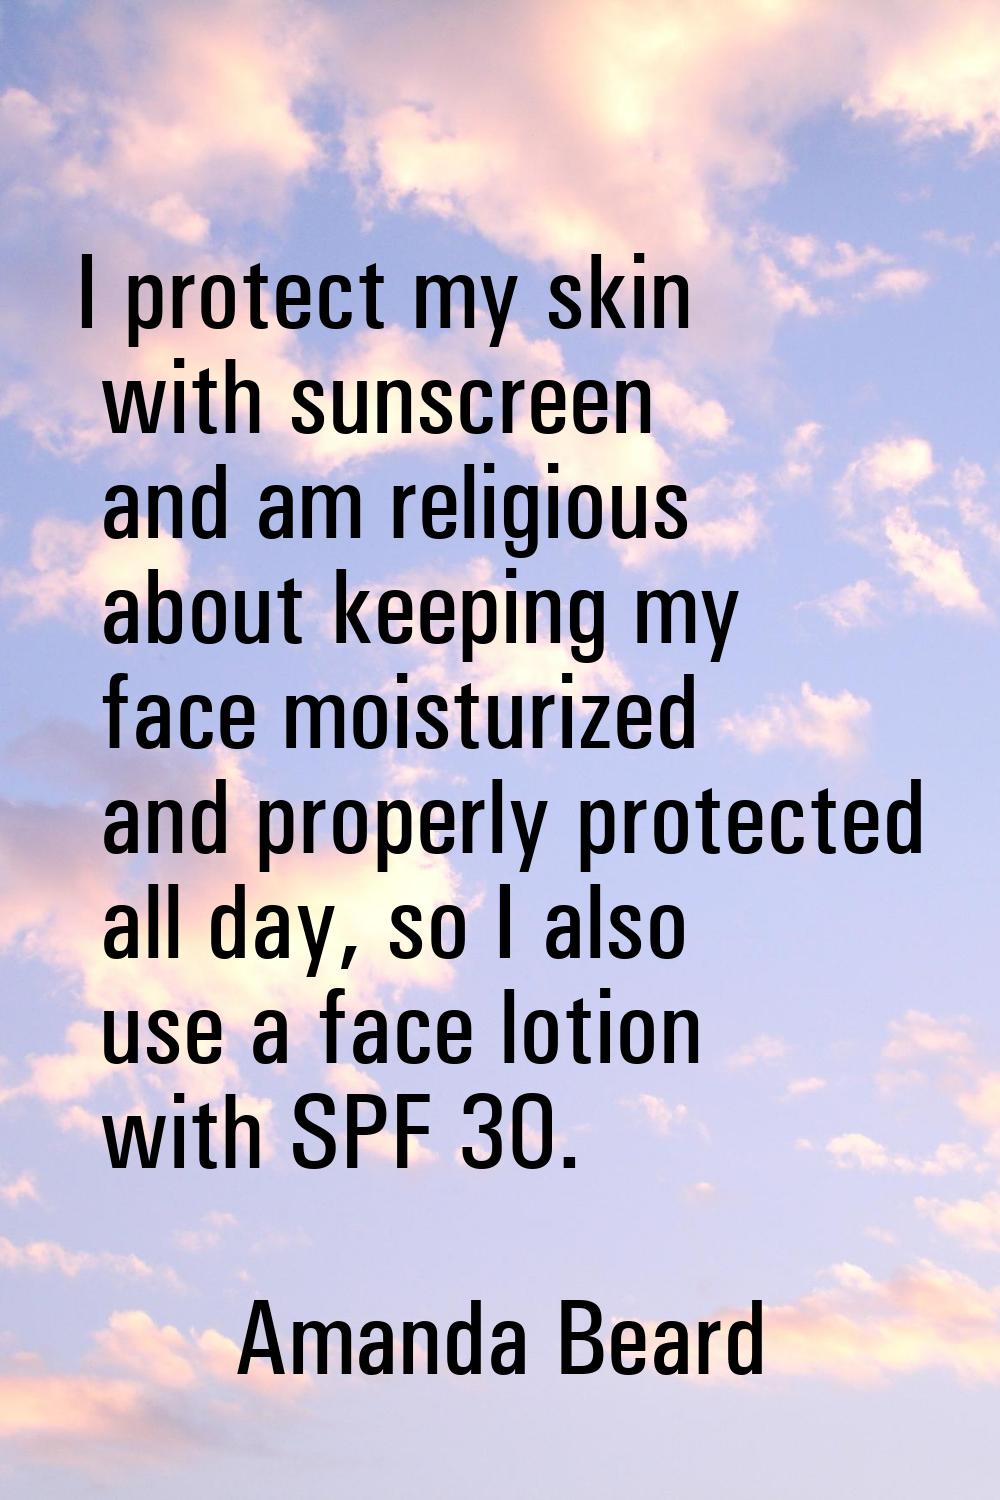 I protect my skin with sunscreen and am religious about keeping my face moisturized and properly pr